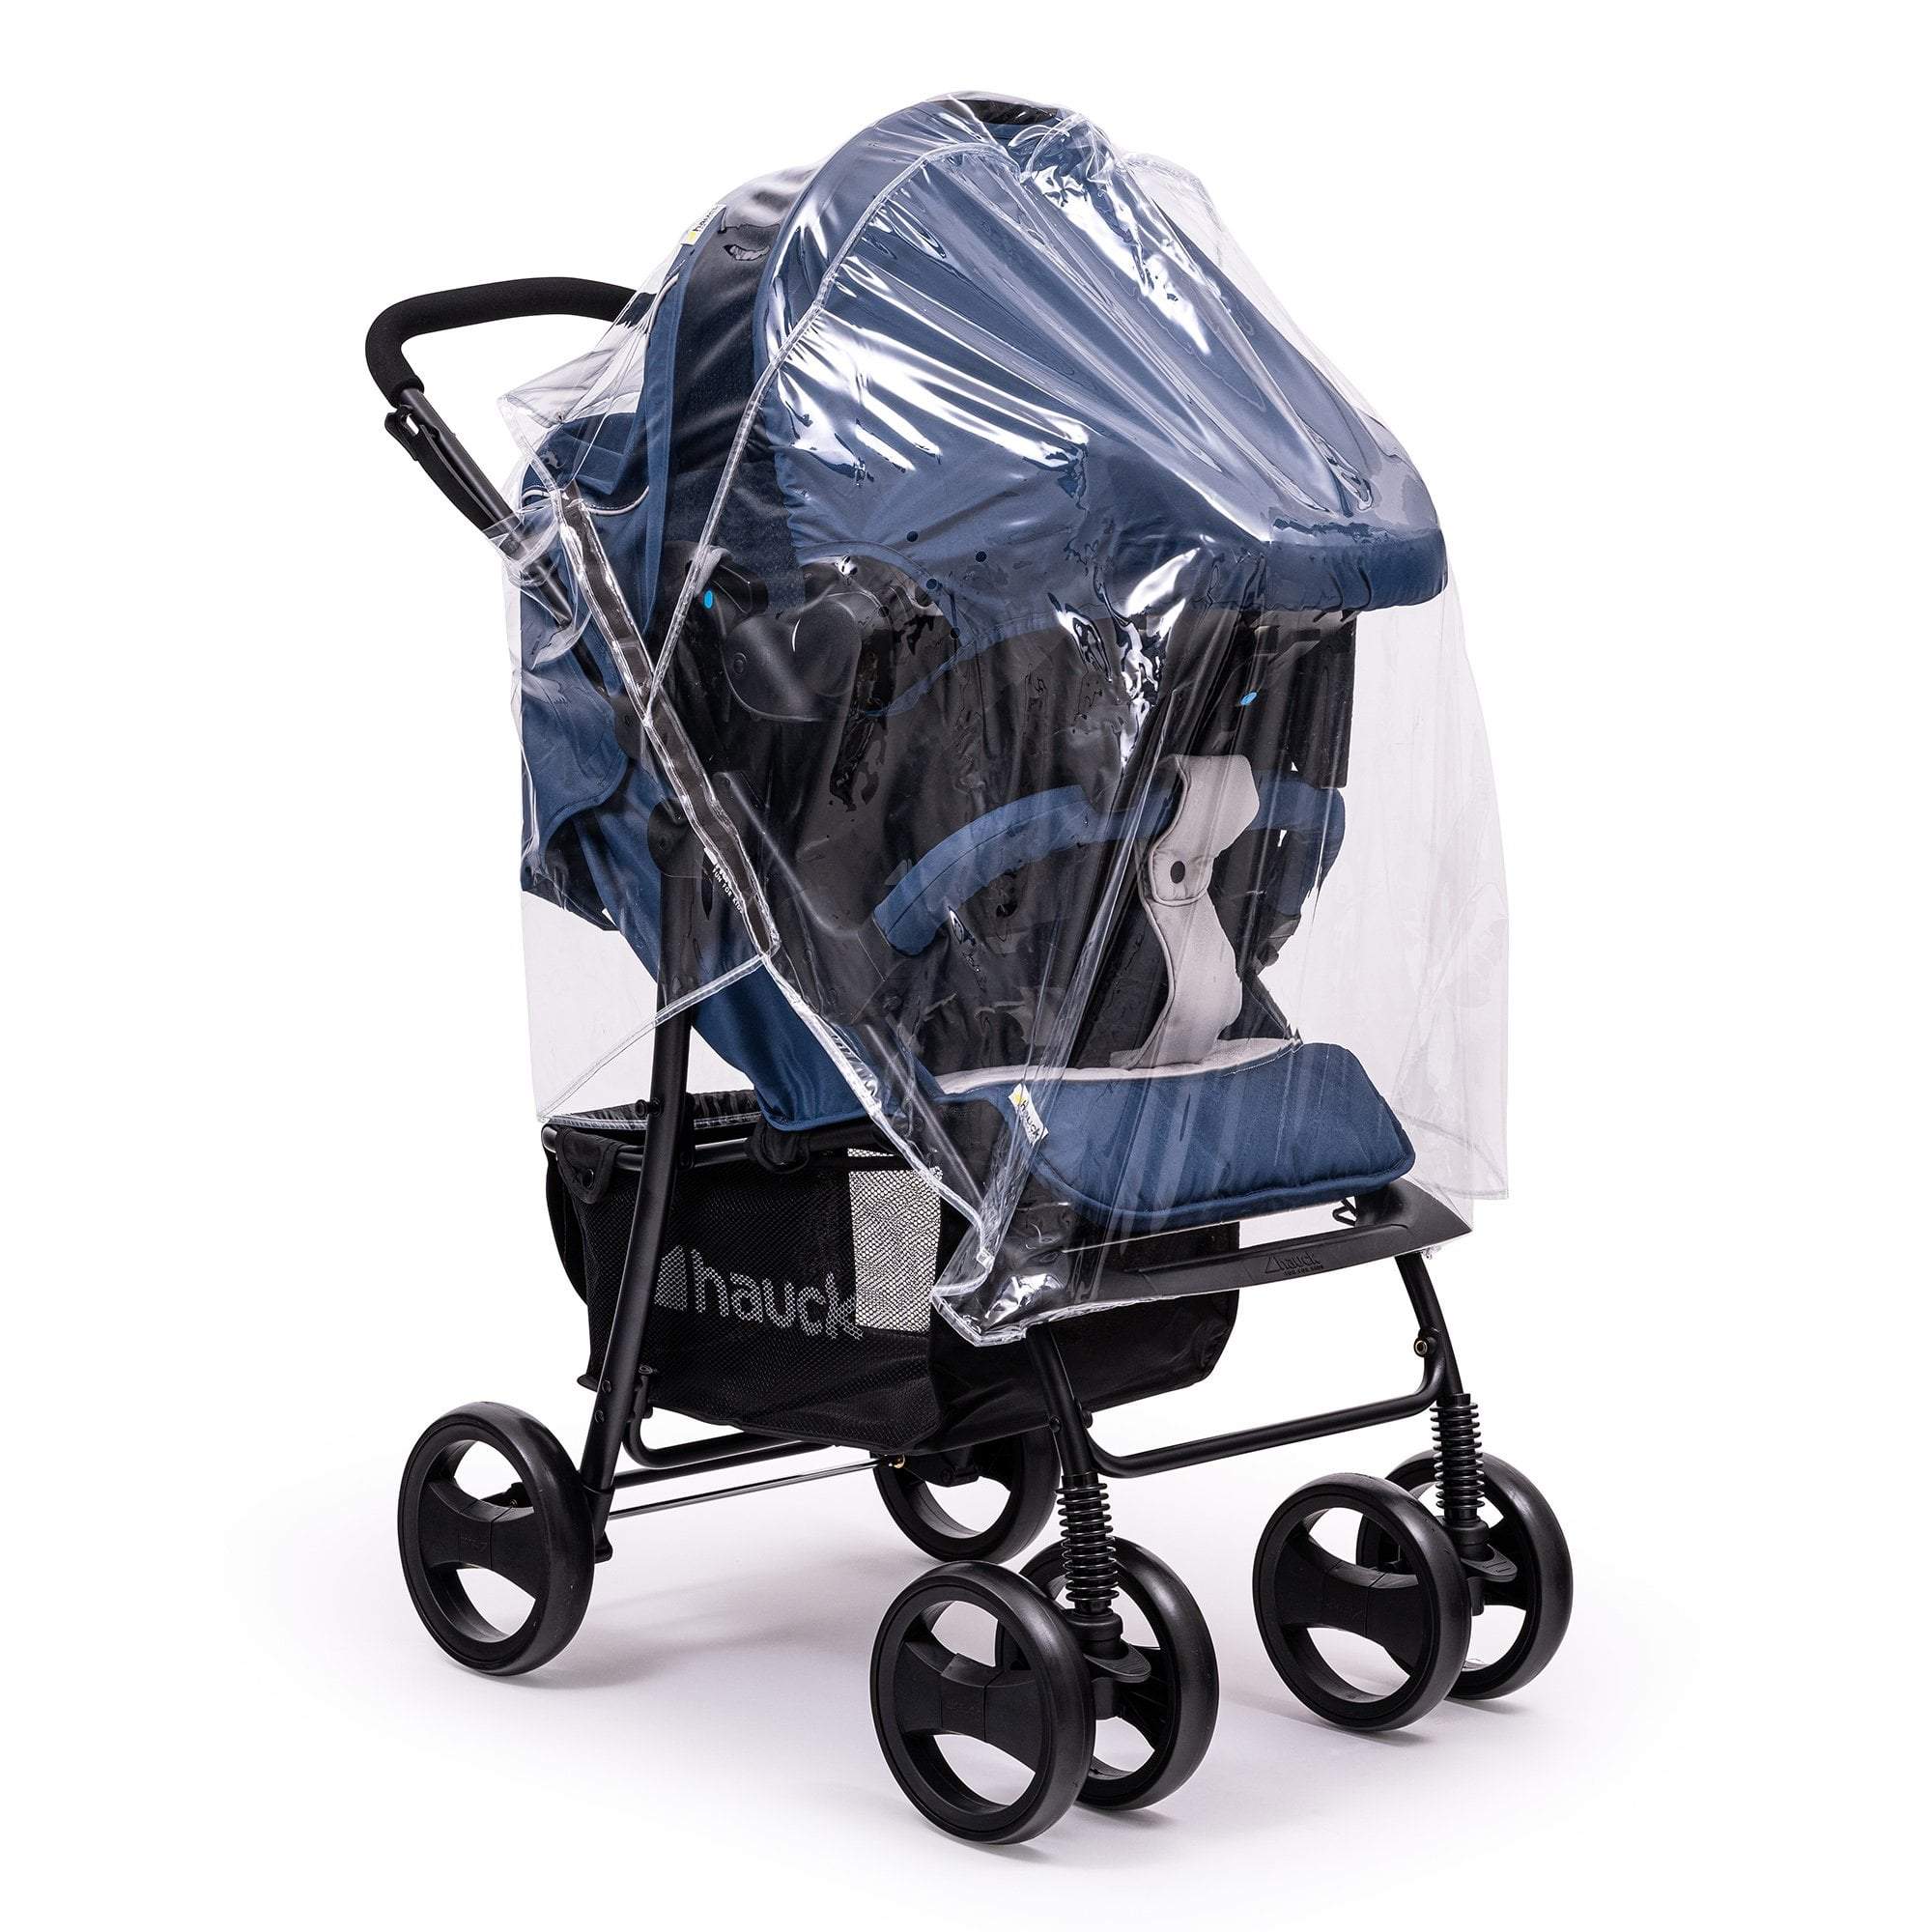 Travel System Raincover Compatible with Bebe 9 - Fits All Models - For Your Little One